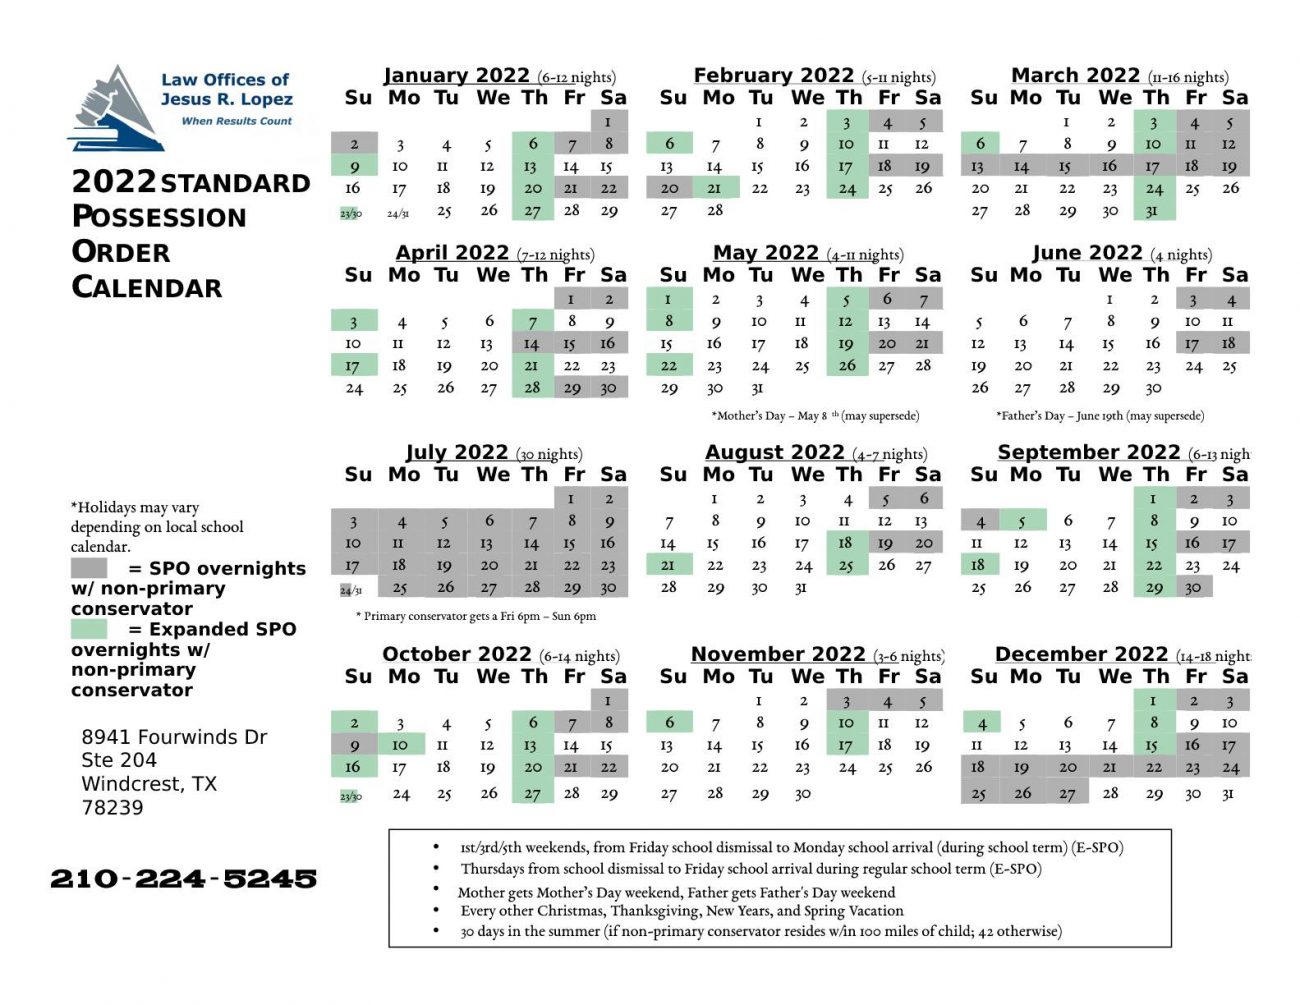 Texas Standard Possession Order Calendar 2022 What Is A Standard Visitation Schedule In 2021?